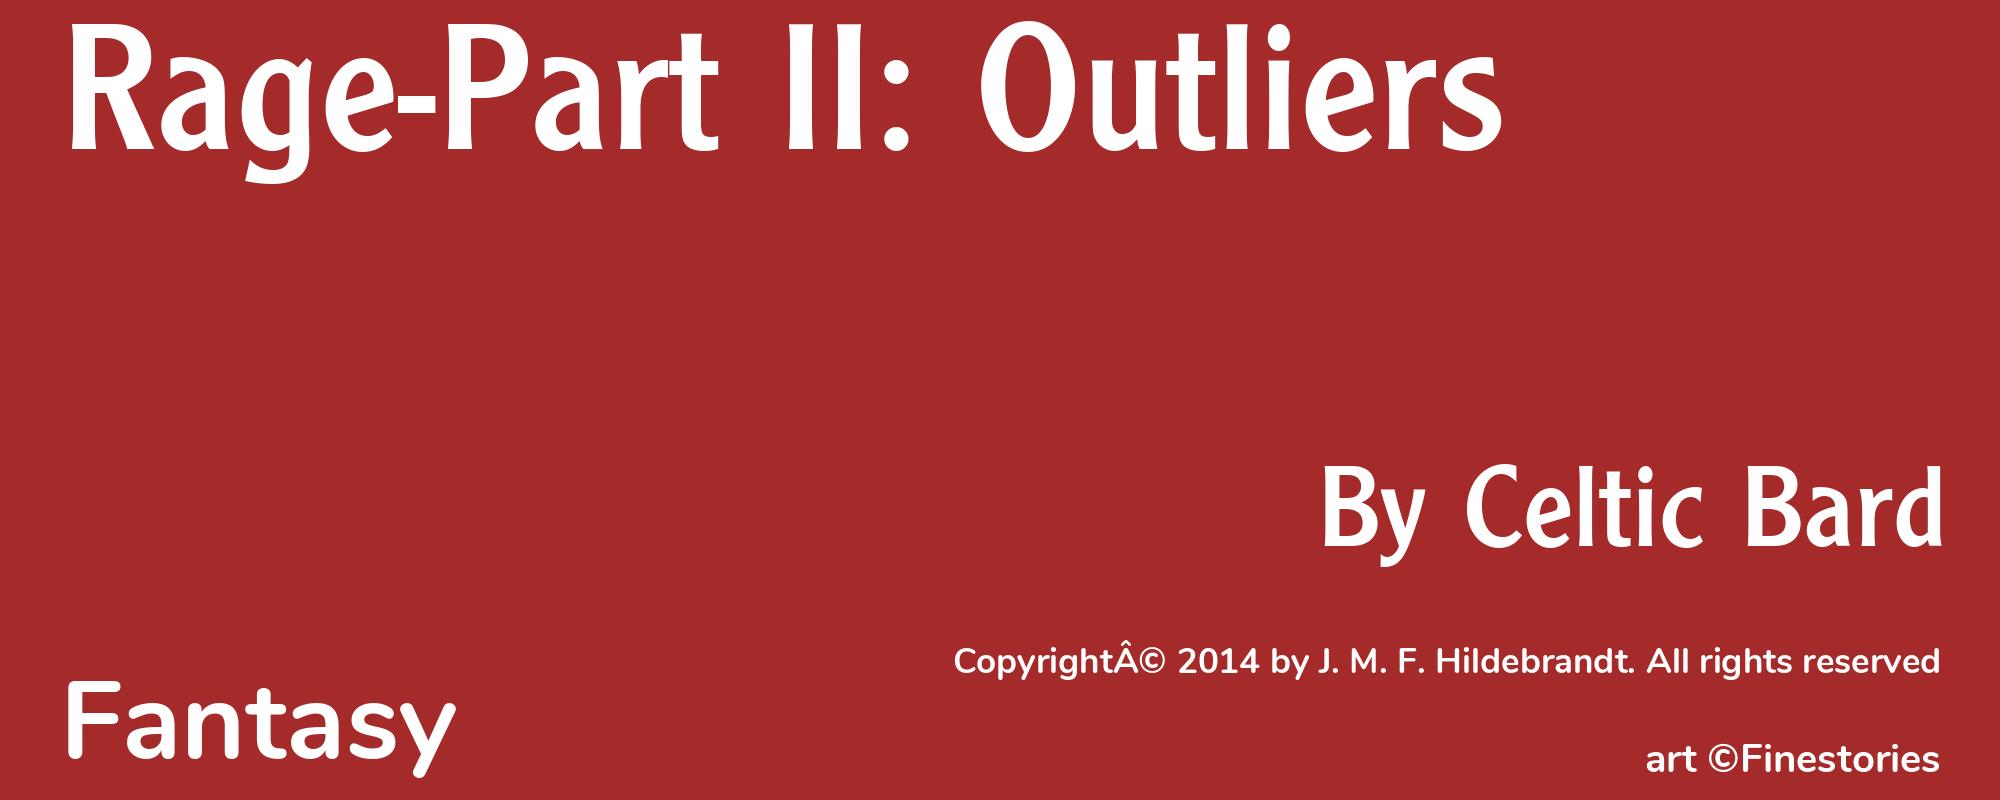 Rage-Part II: Outliers - Cover